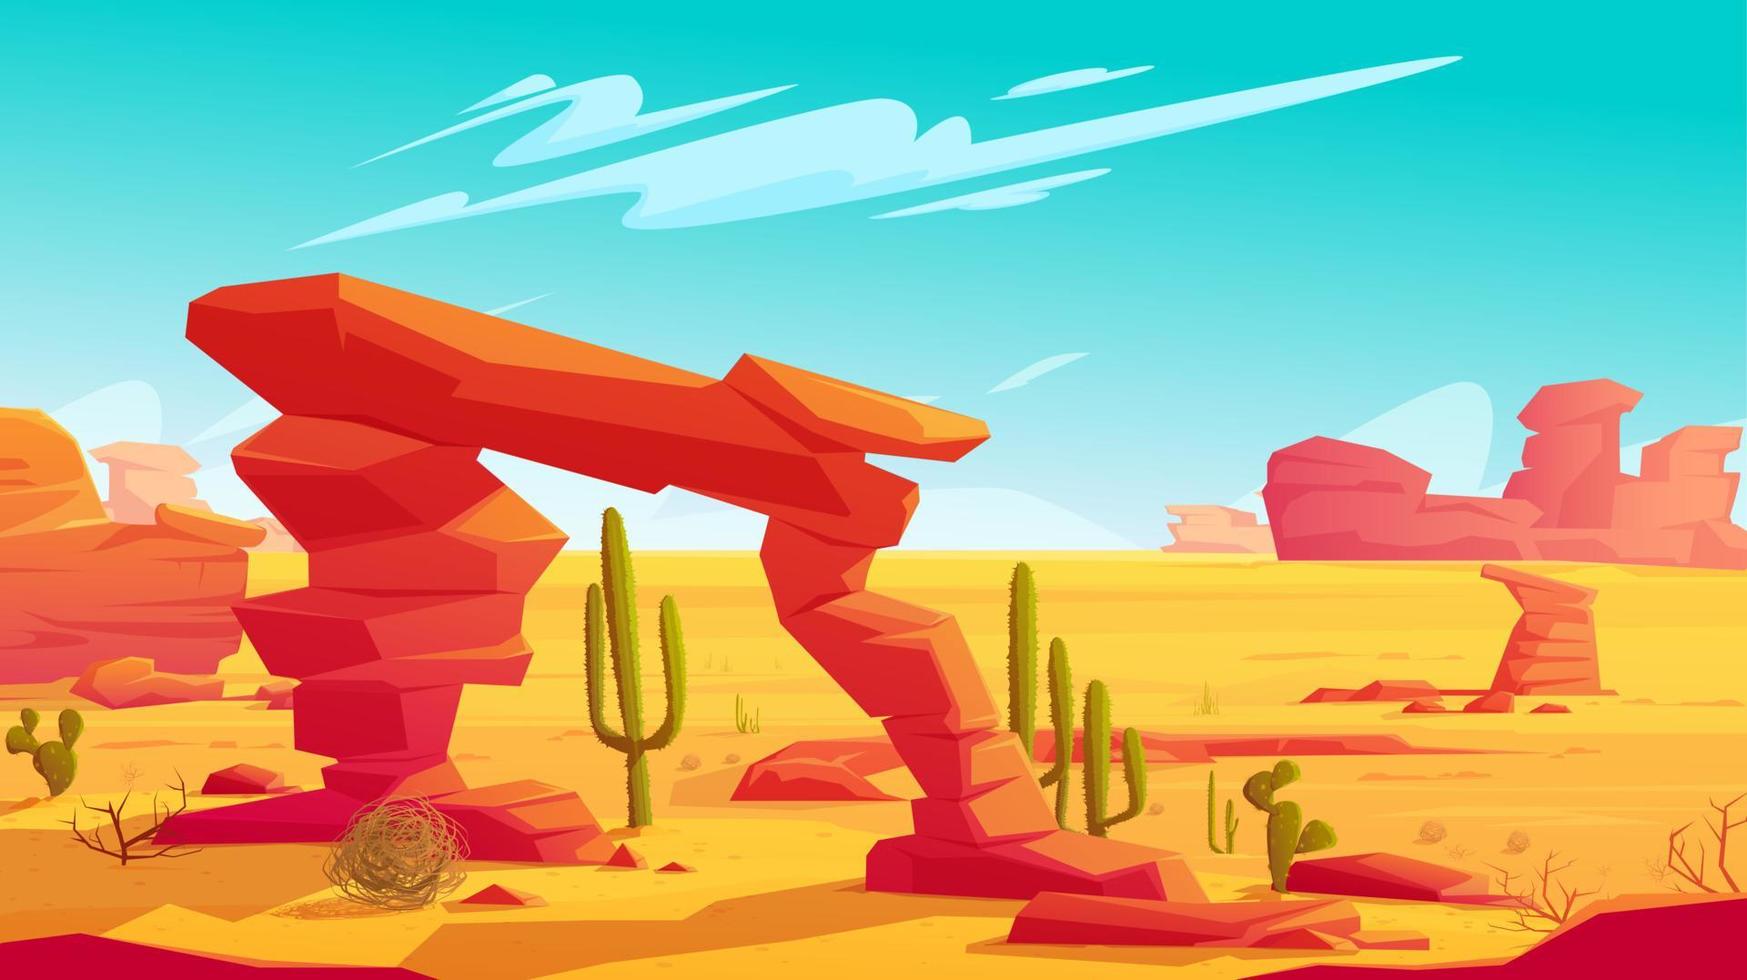 Desert arch and tumbleweed on natural landscape vector